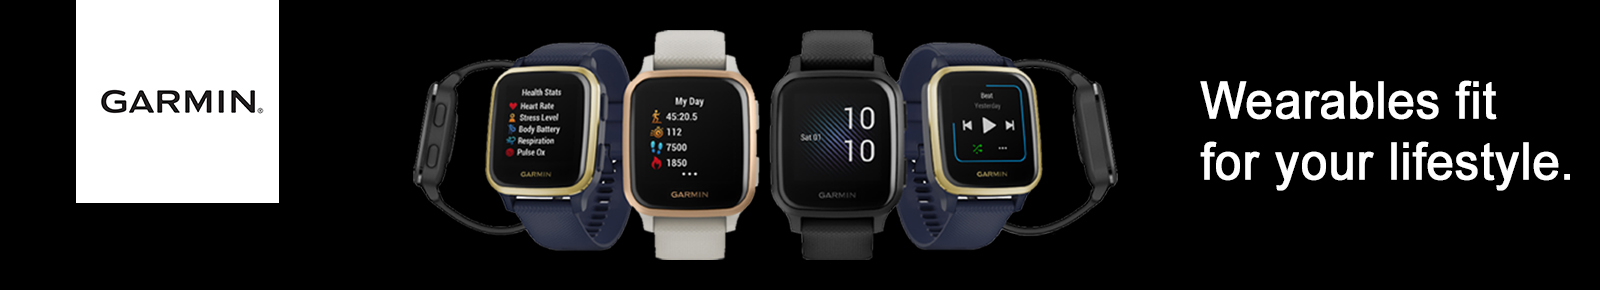 Buy Garmin Watches Online with Afterpay 